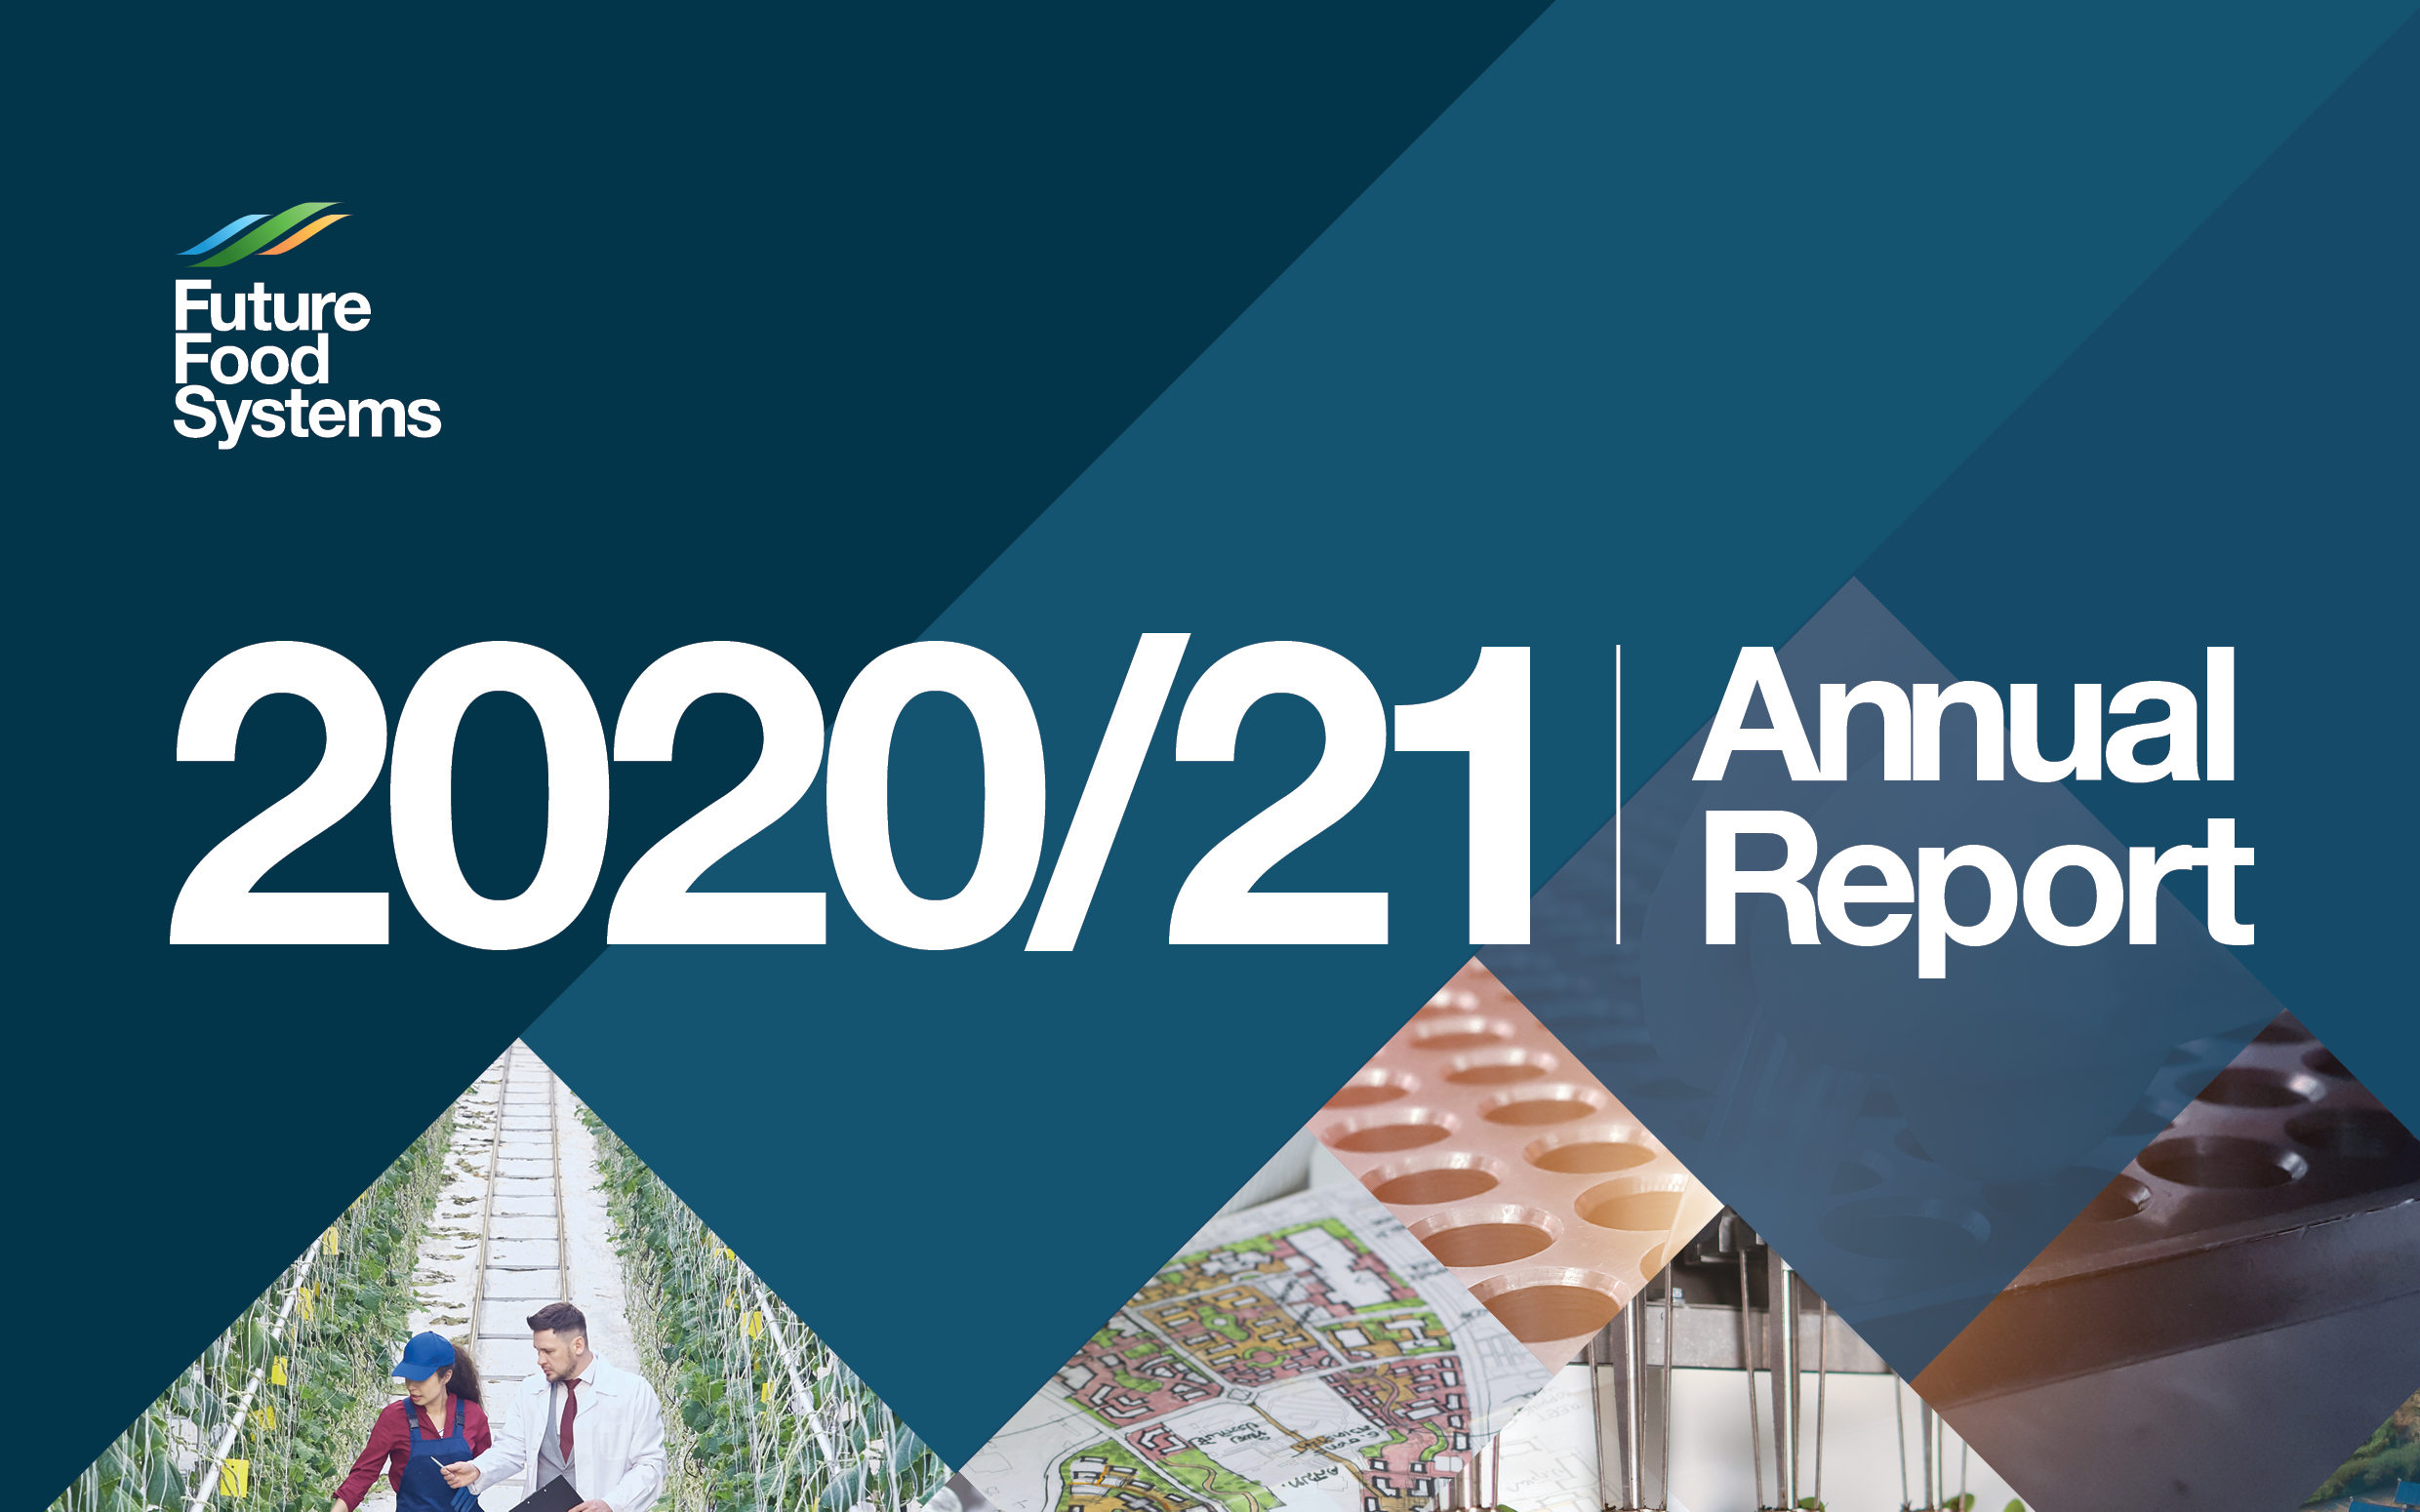 The Future Food Systems CRC 2020/2021 Annual Report provides an overview of project achievements, financials, CRC case studies and highlights of the second year of operation.